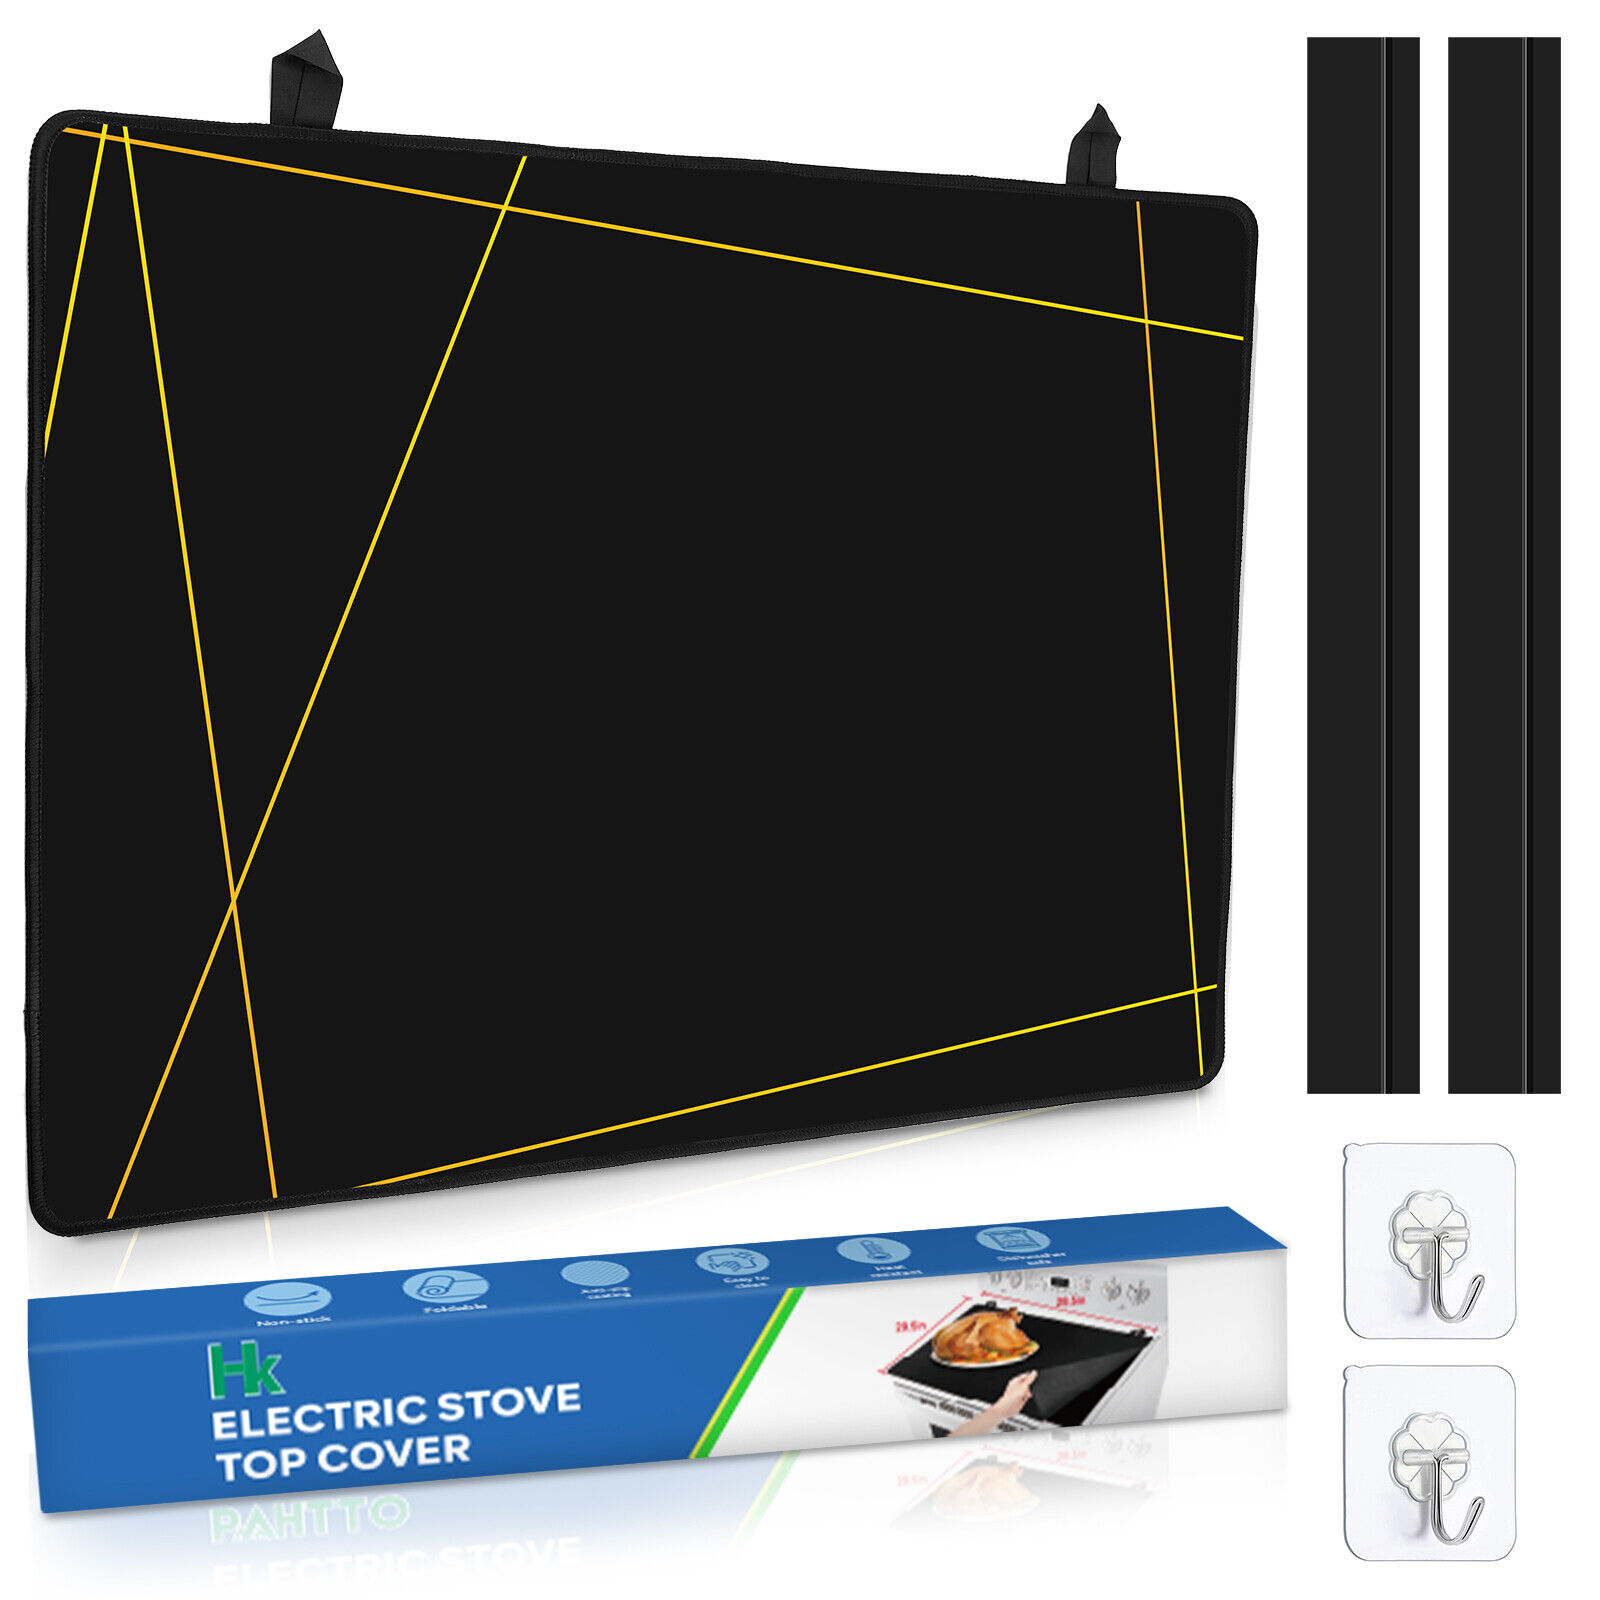 Stove Top Cover for Electric Stove (28.5”x 20.5”) Cooktop Protector (Line)